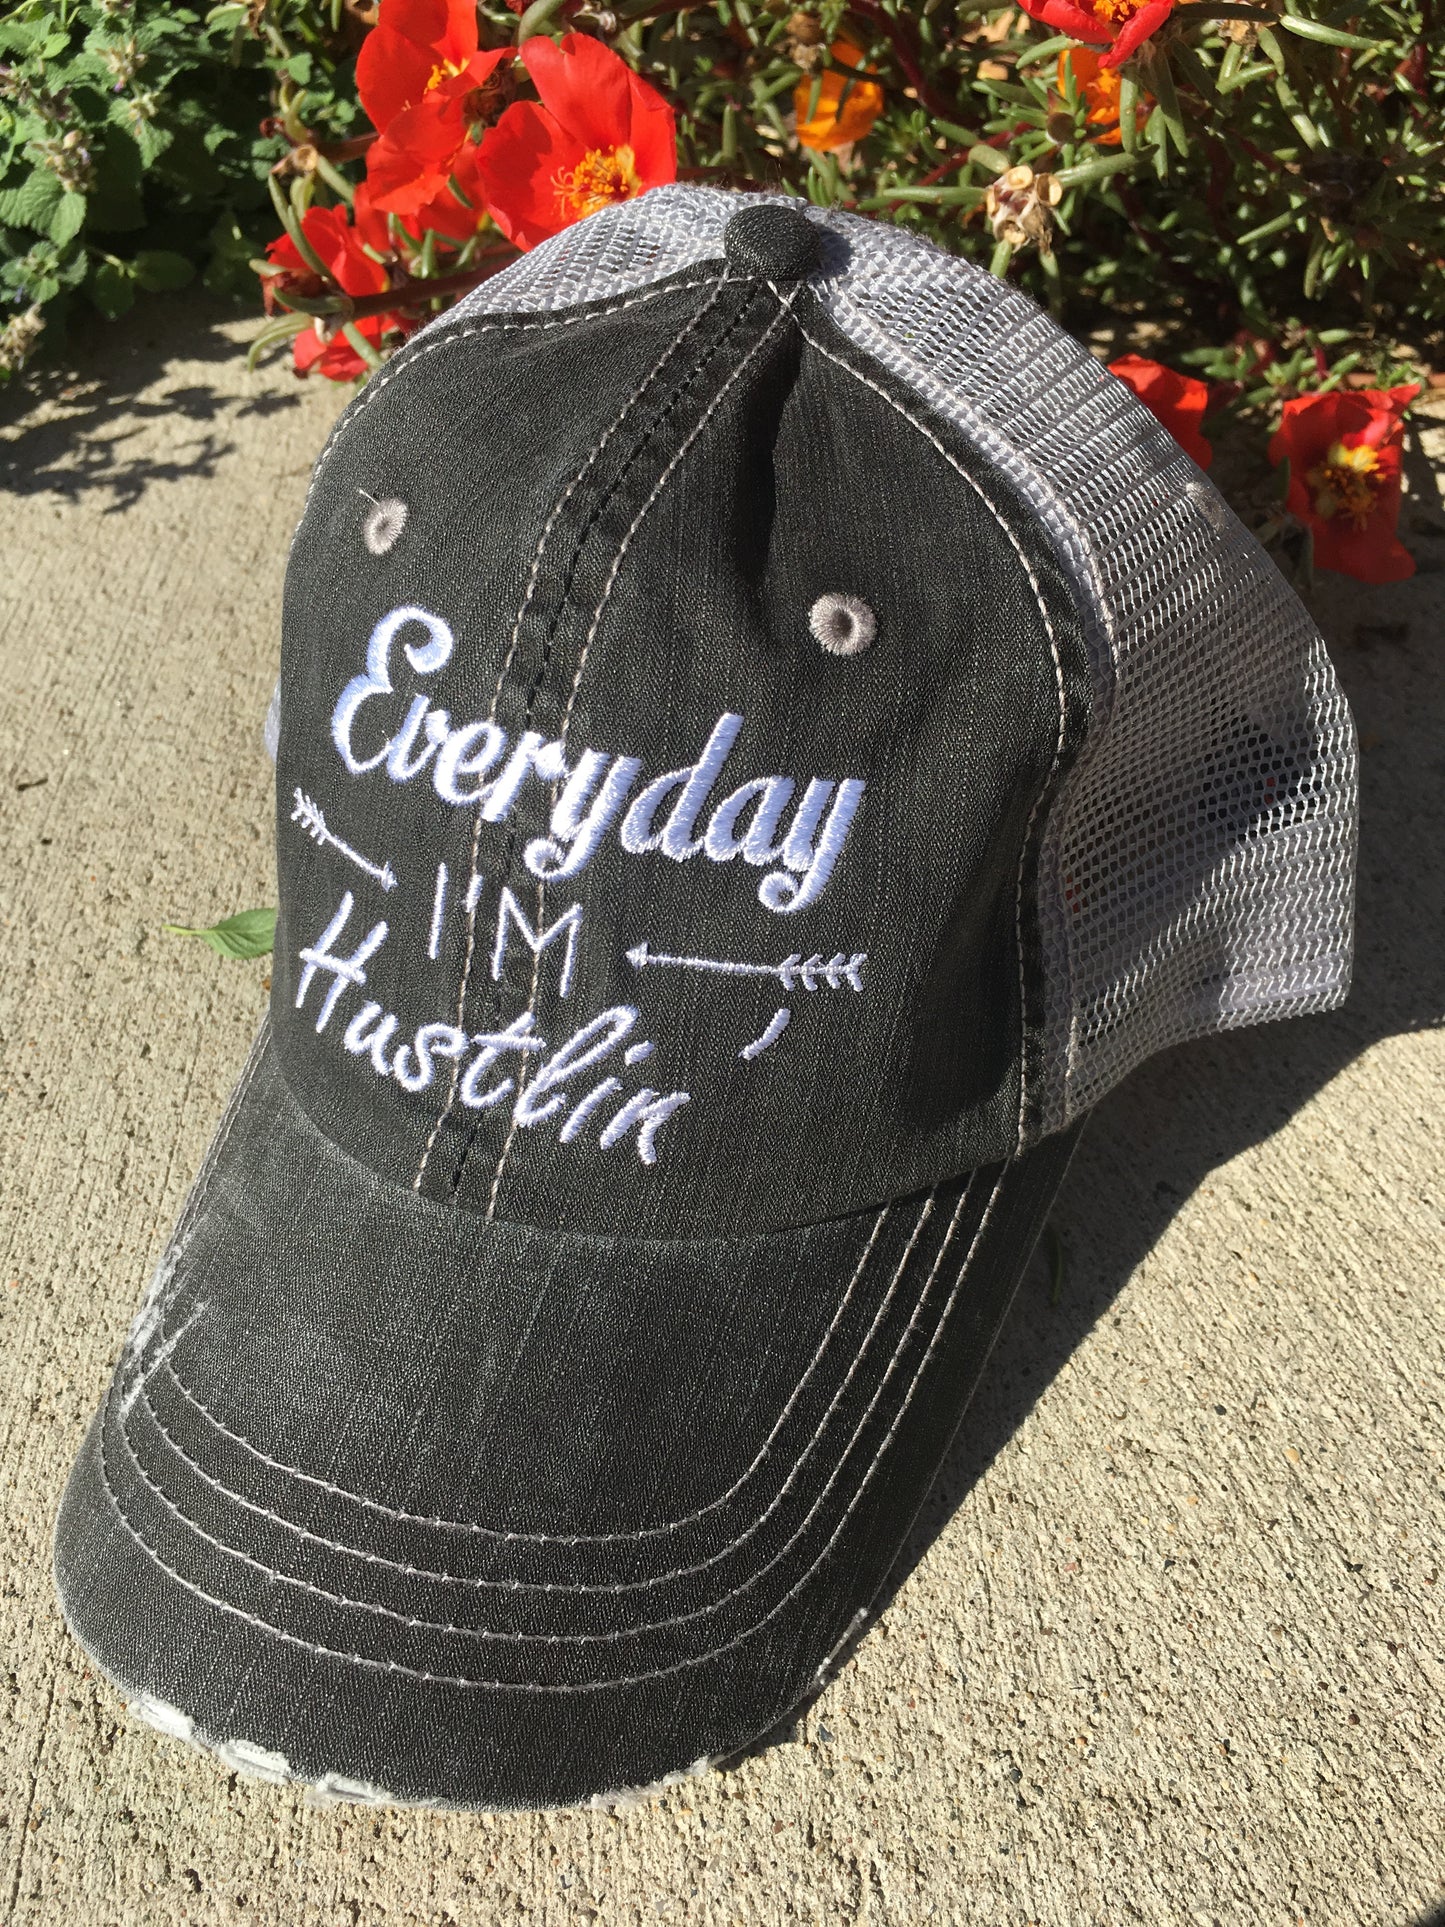 Hats and tops { Everyday I'm hustlin' } - Stacy's Pink Martini Boutique